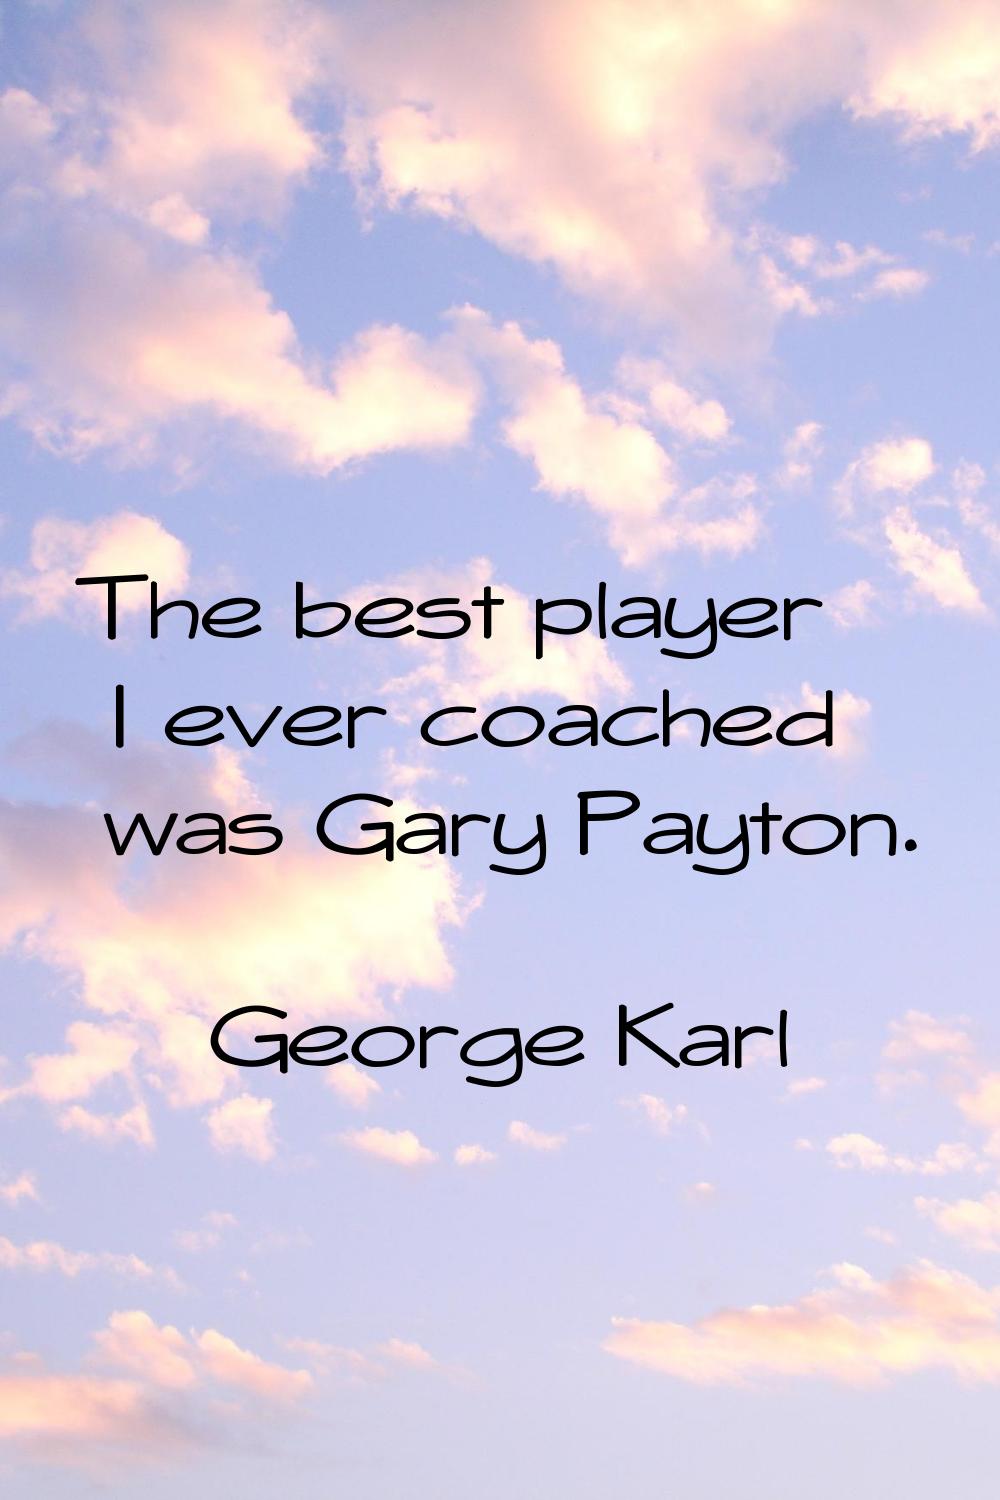 The best player I ever coached was Gary Payton.